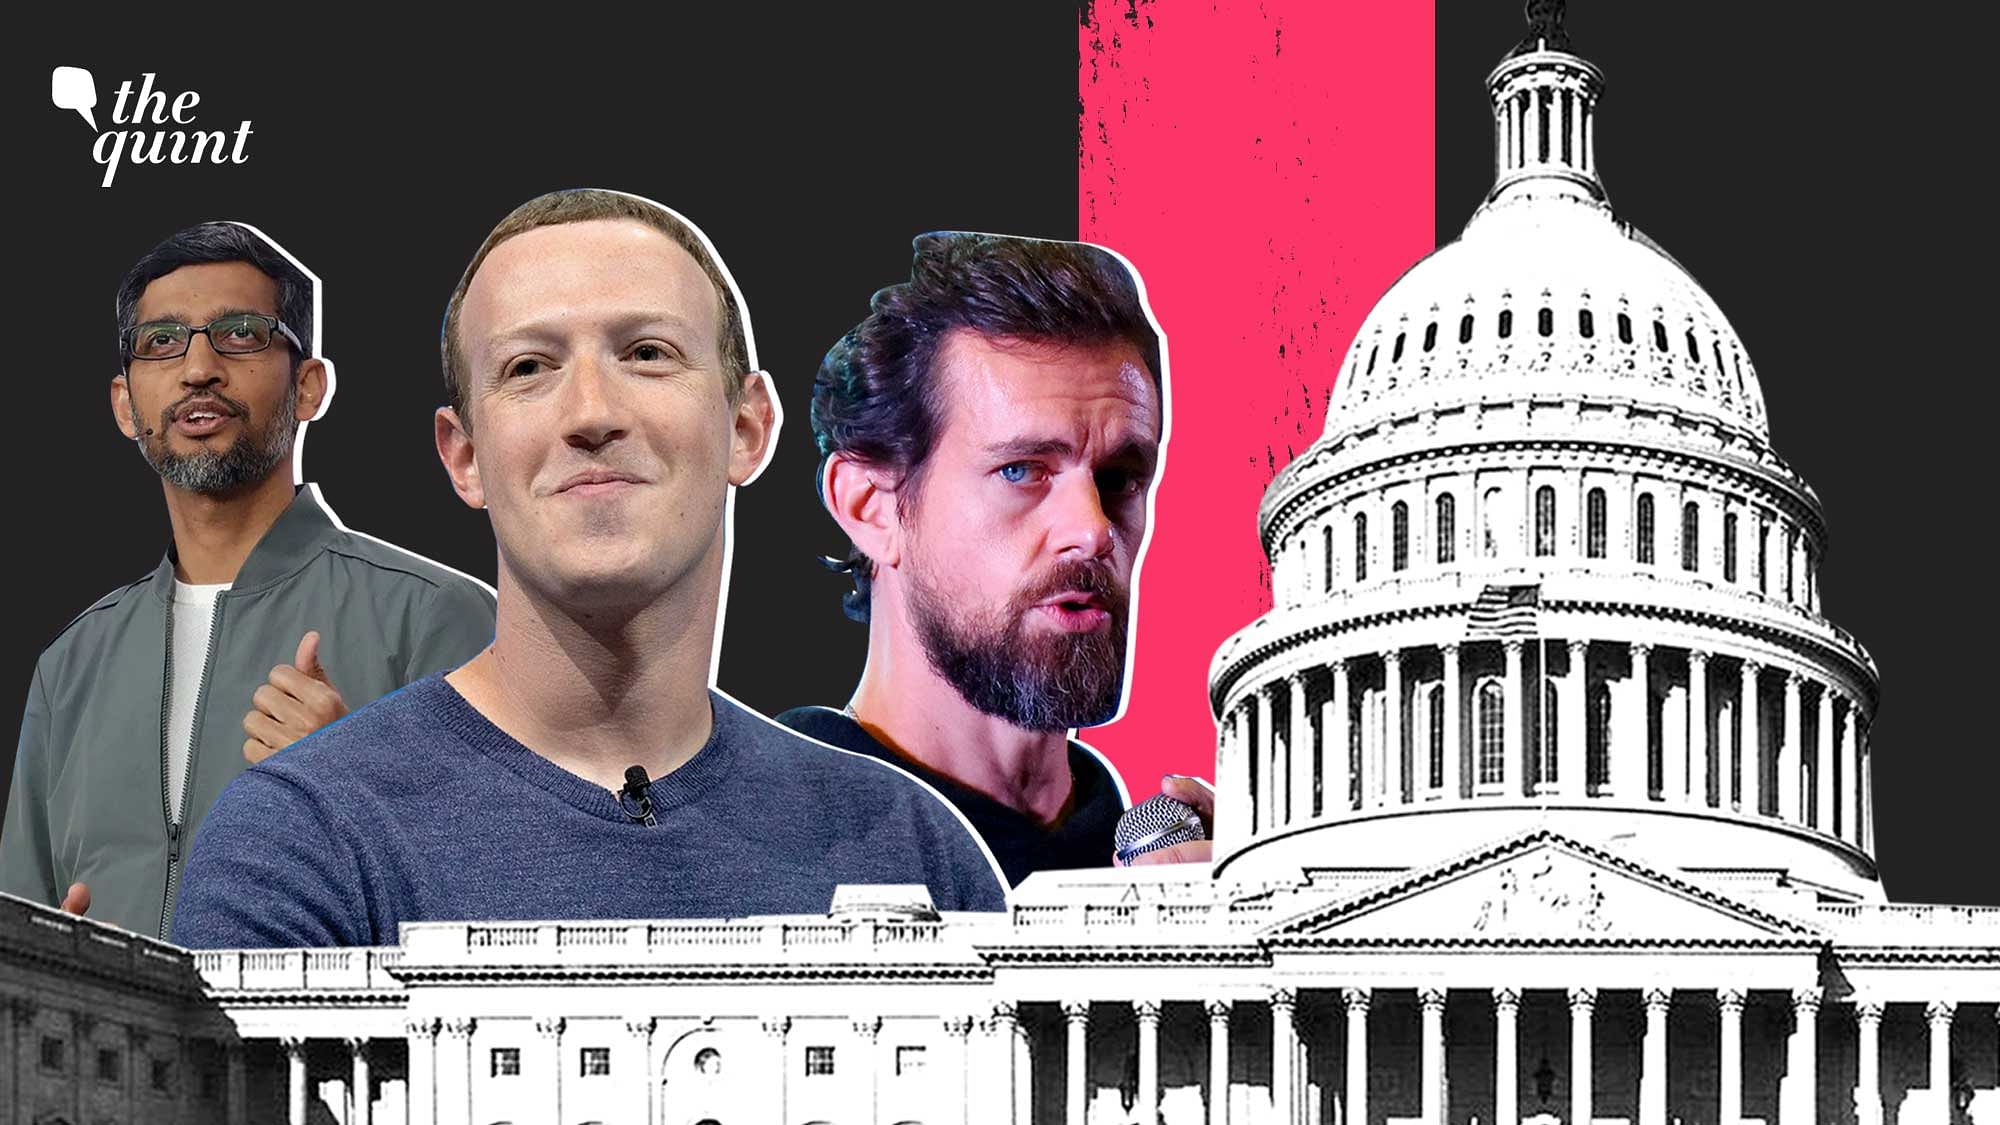 Section 230 Hearing: Six days before the United Presidential election, the CEOs of Facebook, Google and Twitter will testify before the US Congress on issues related to moderation of content on social media platforms.